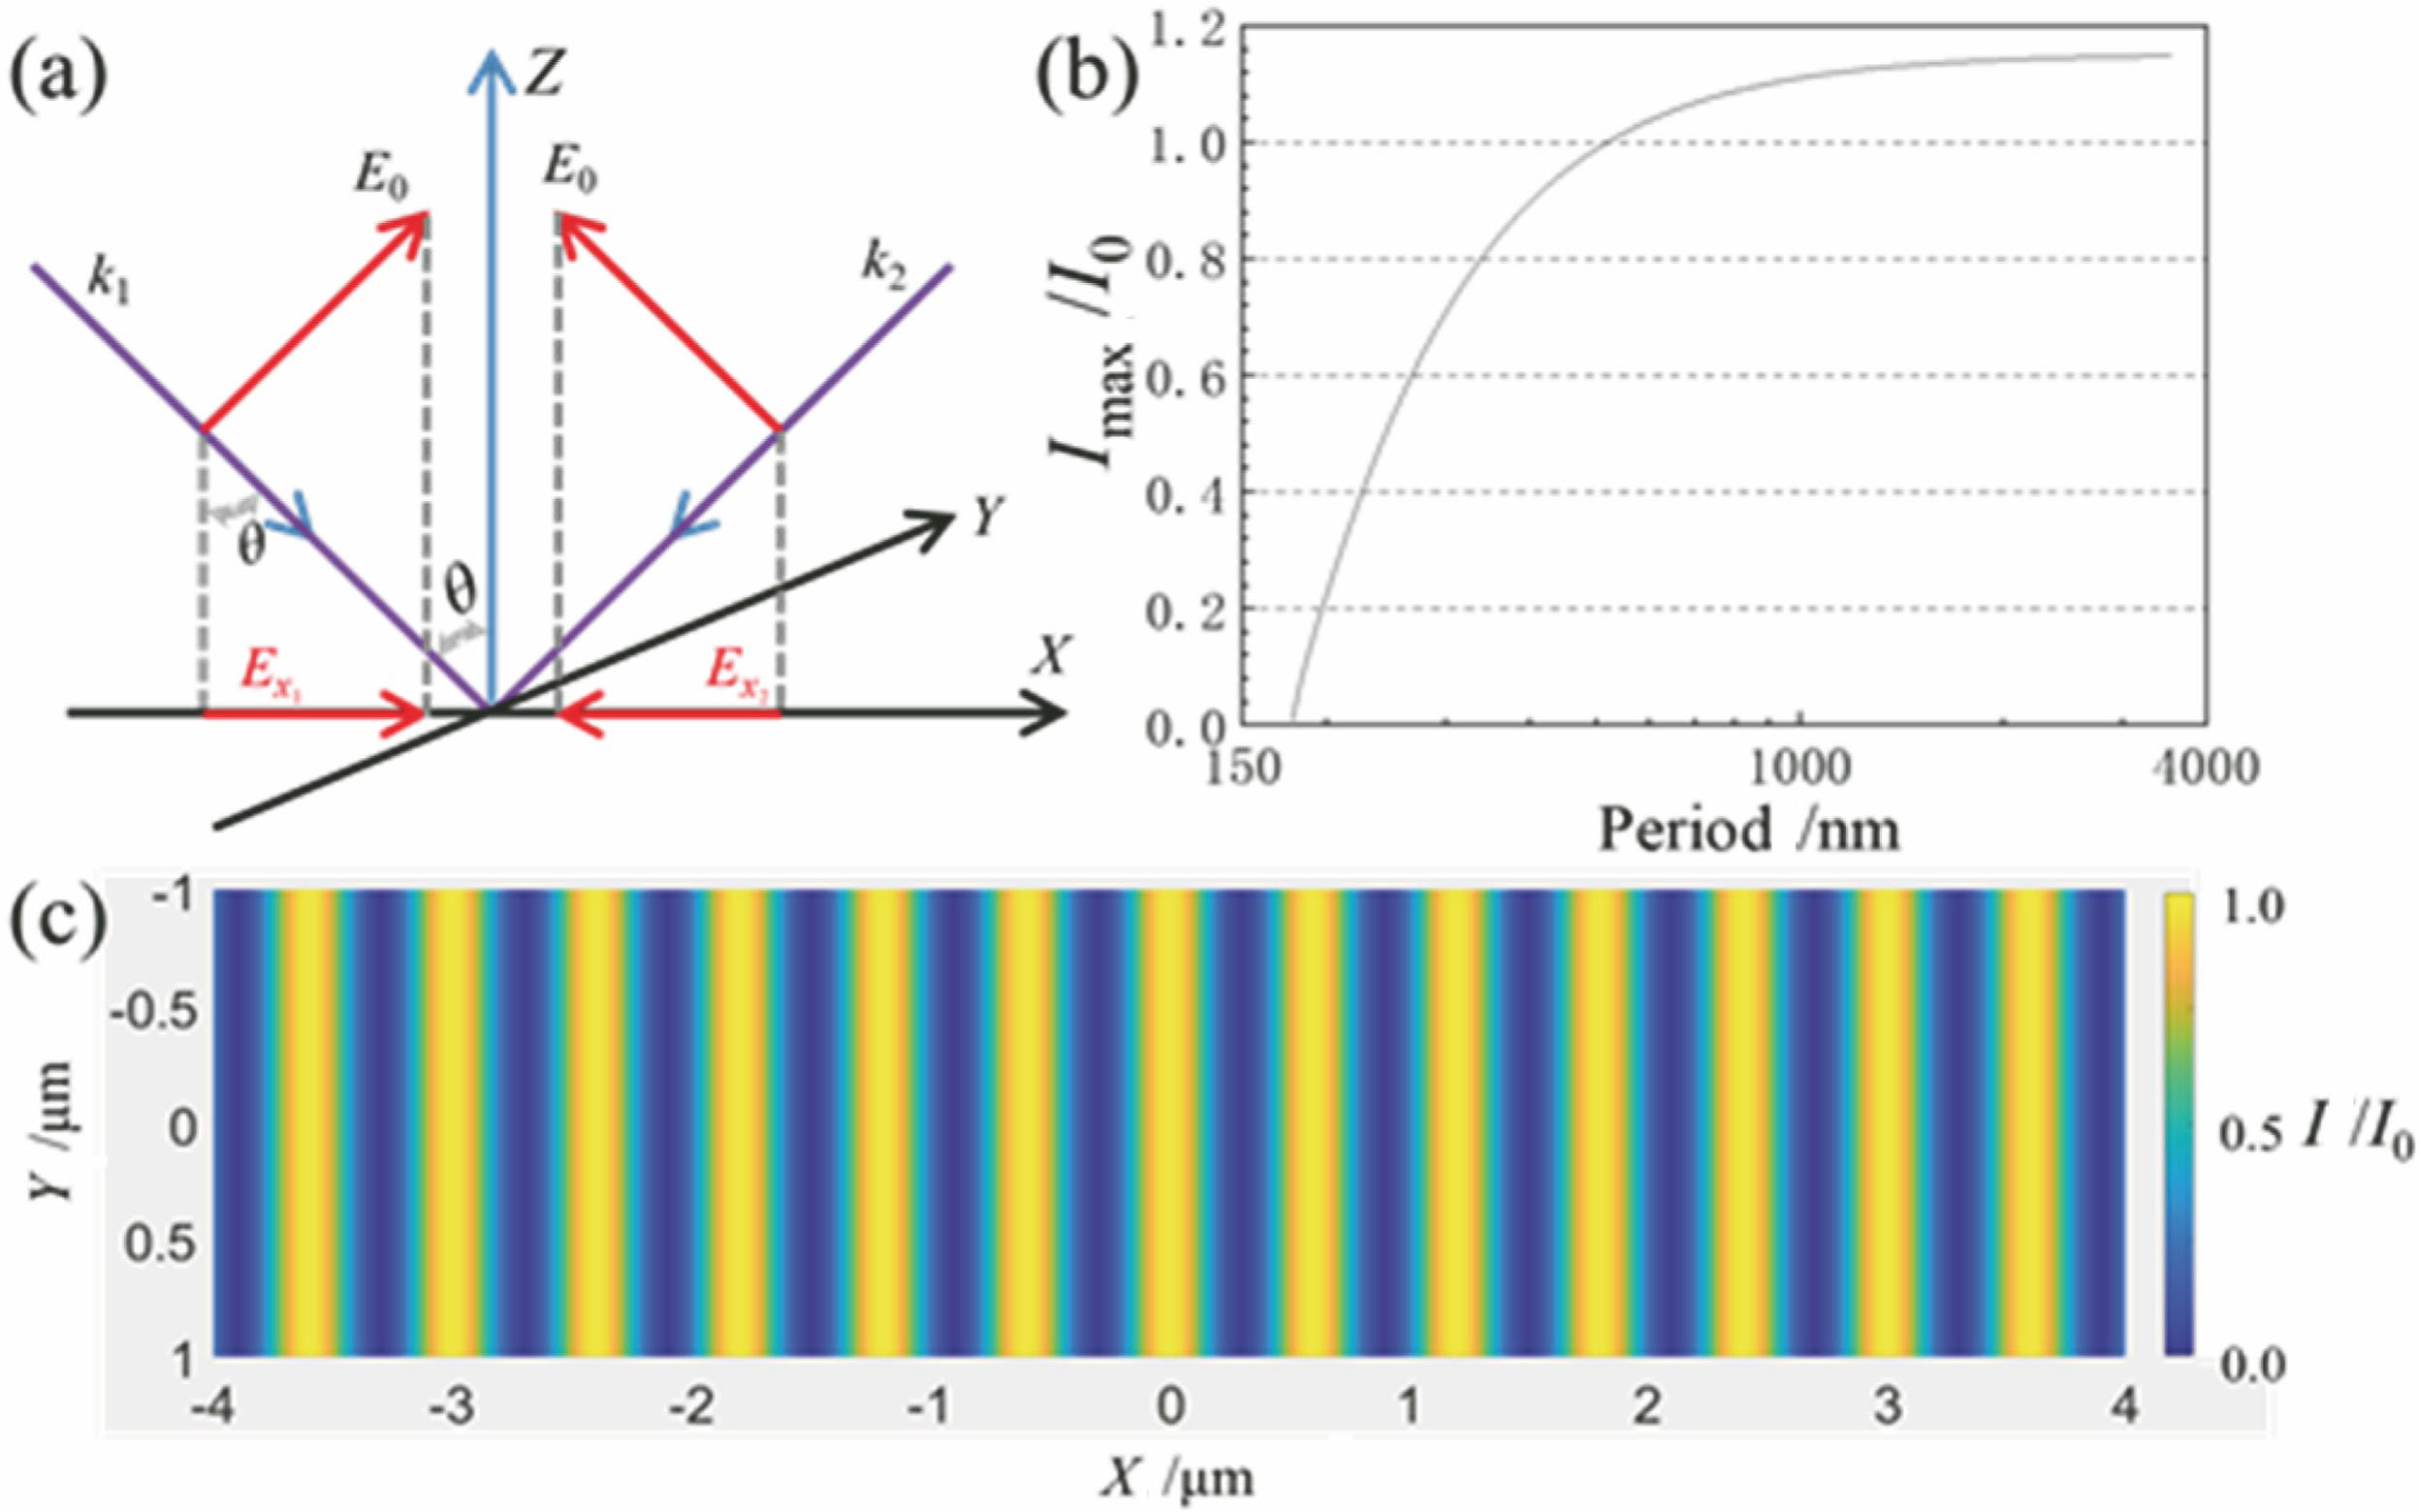 Analysis on nanosecond laser interference on Si. (a) Schematic of nanosecond laser interference; (b) maximumlight intensity as a function of period change; (c) surface light intensity distribution of two-beam interference